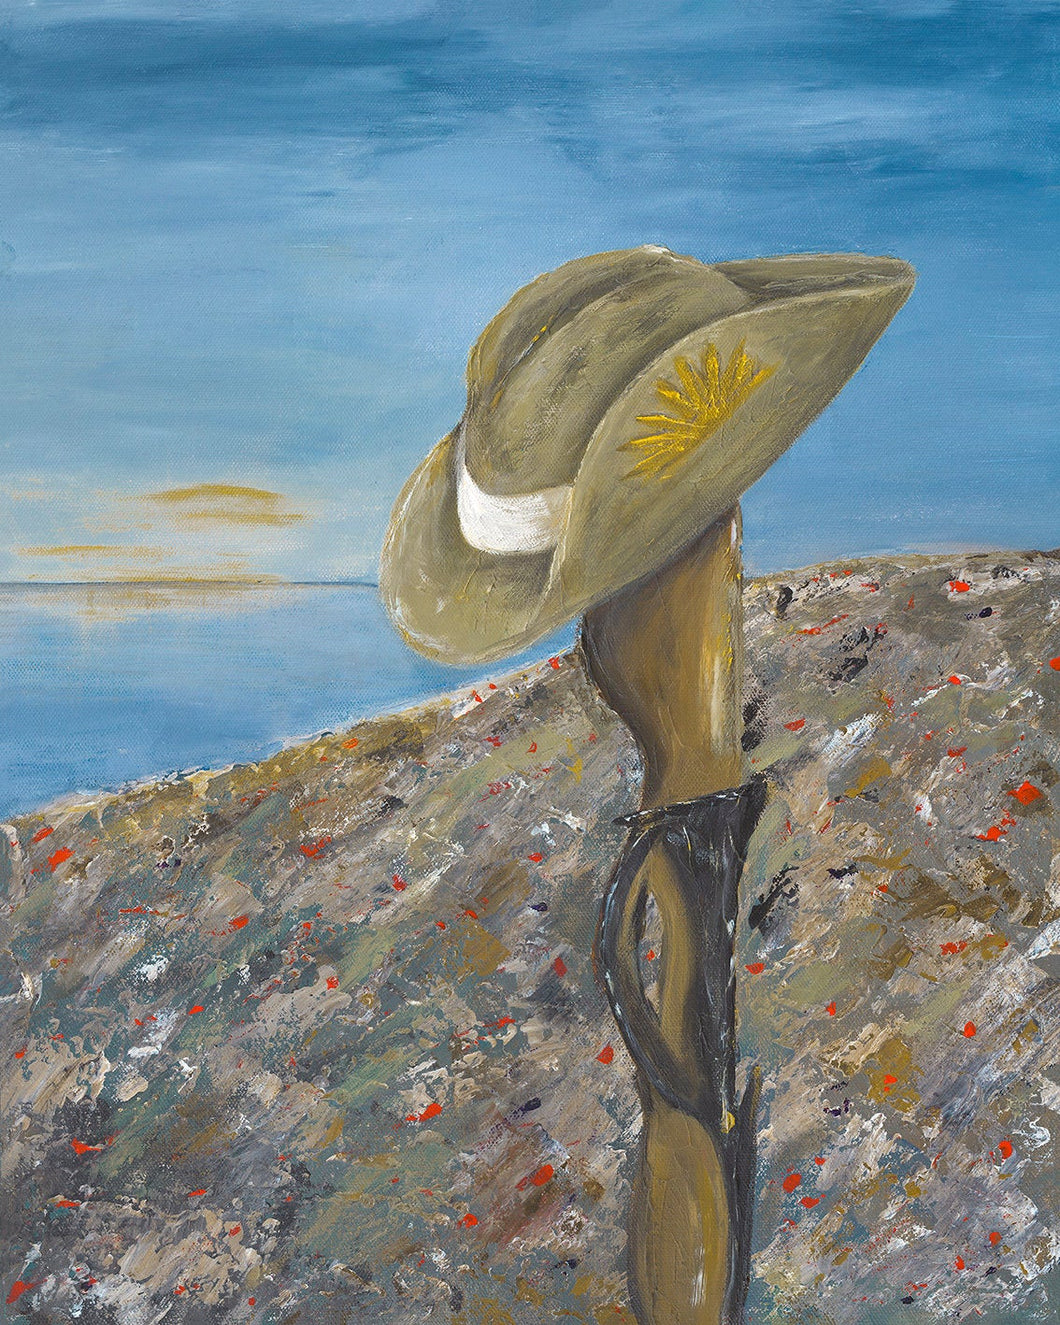 Original painting of a Digger's slouch hat resting on a gun with an ANZAC inspired Crest